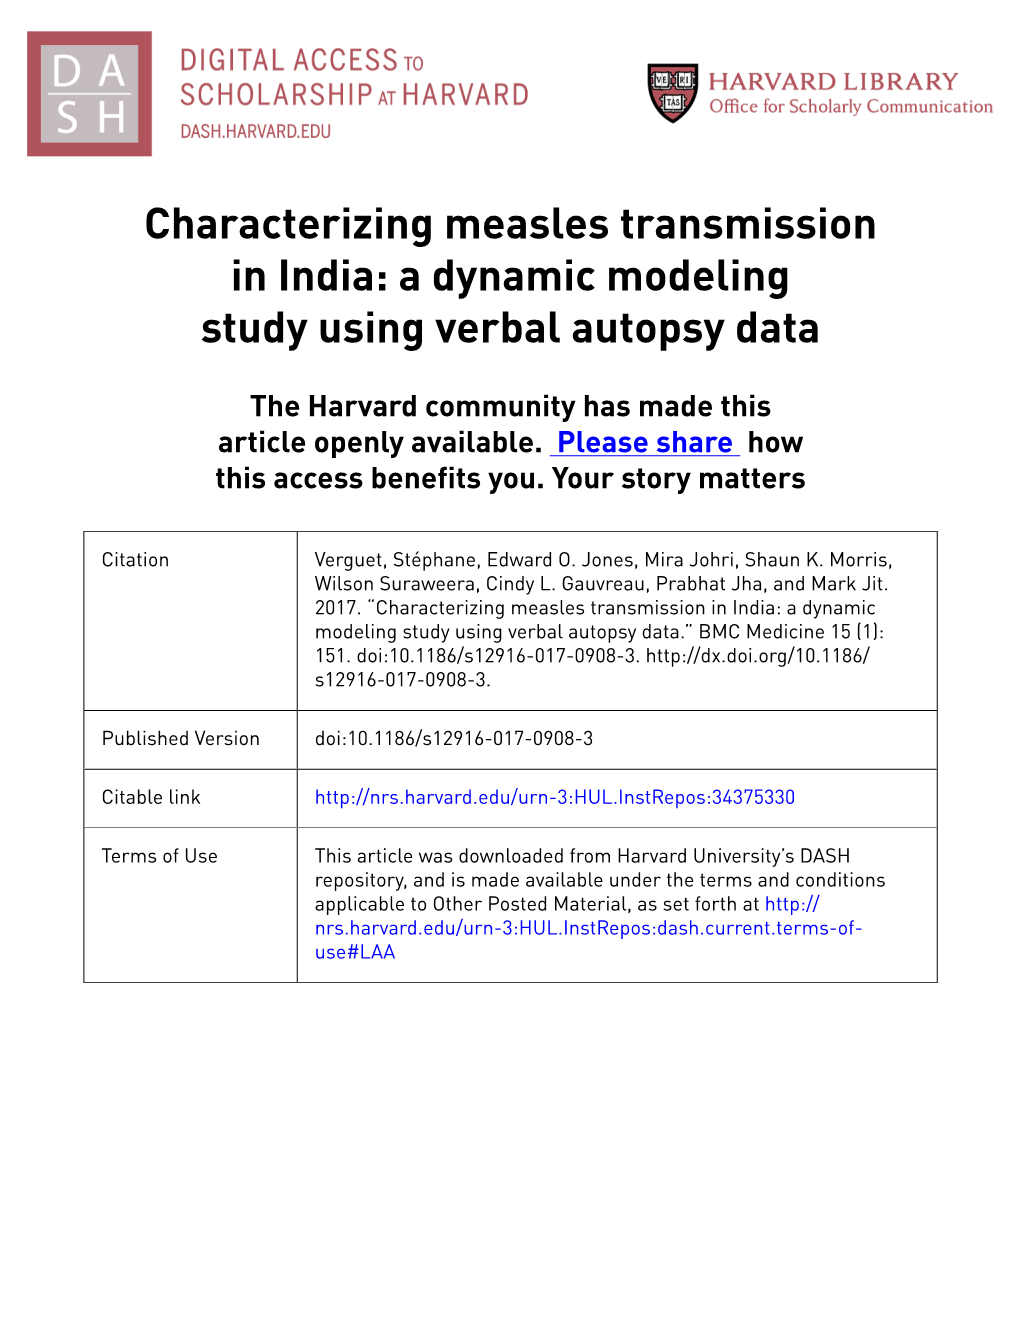 Characterizing Measles Transmission in India: a Dynamic Modeling Study Using Verbal Autopsy Data